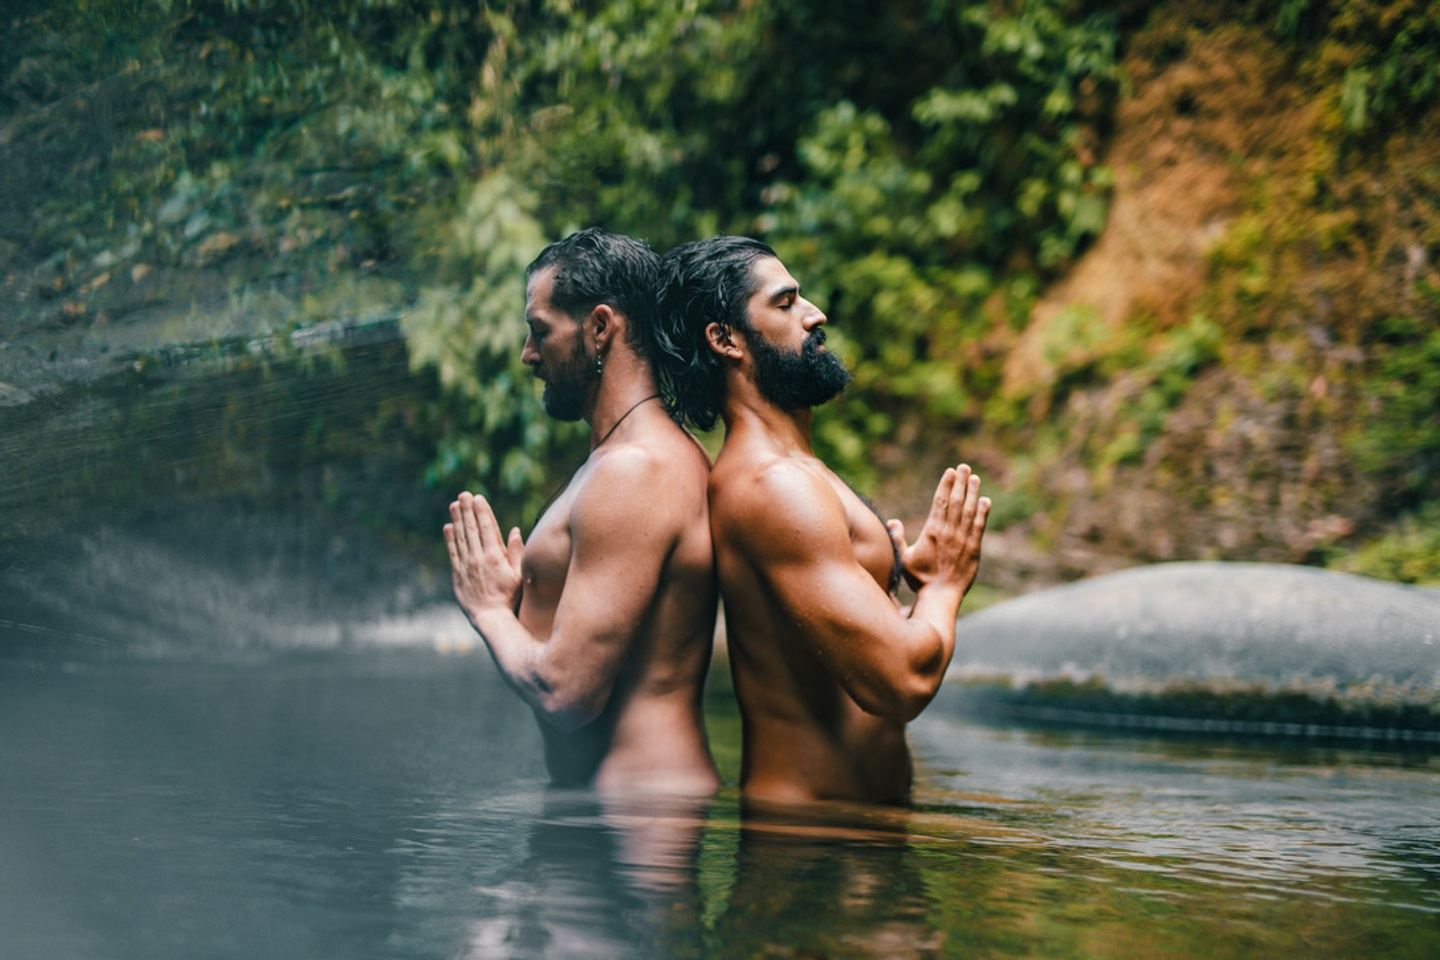 Remembering Wholeness: A Queer Men's Wellness Experience